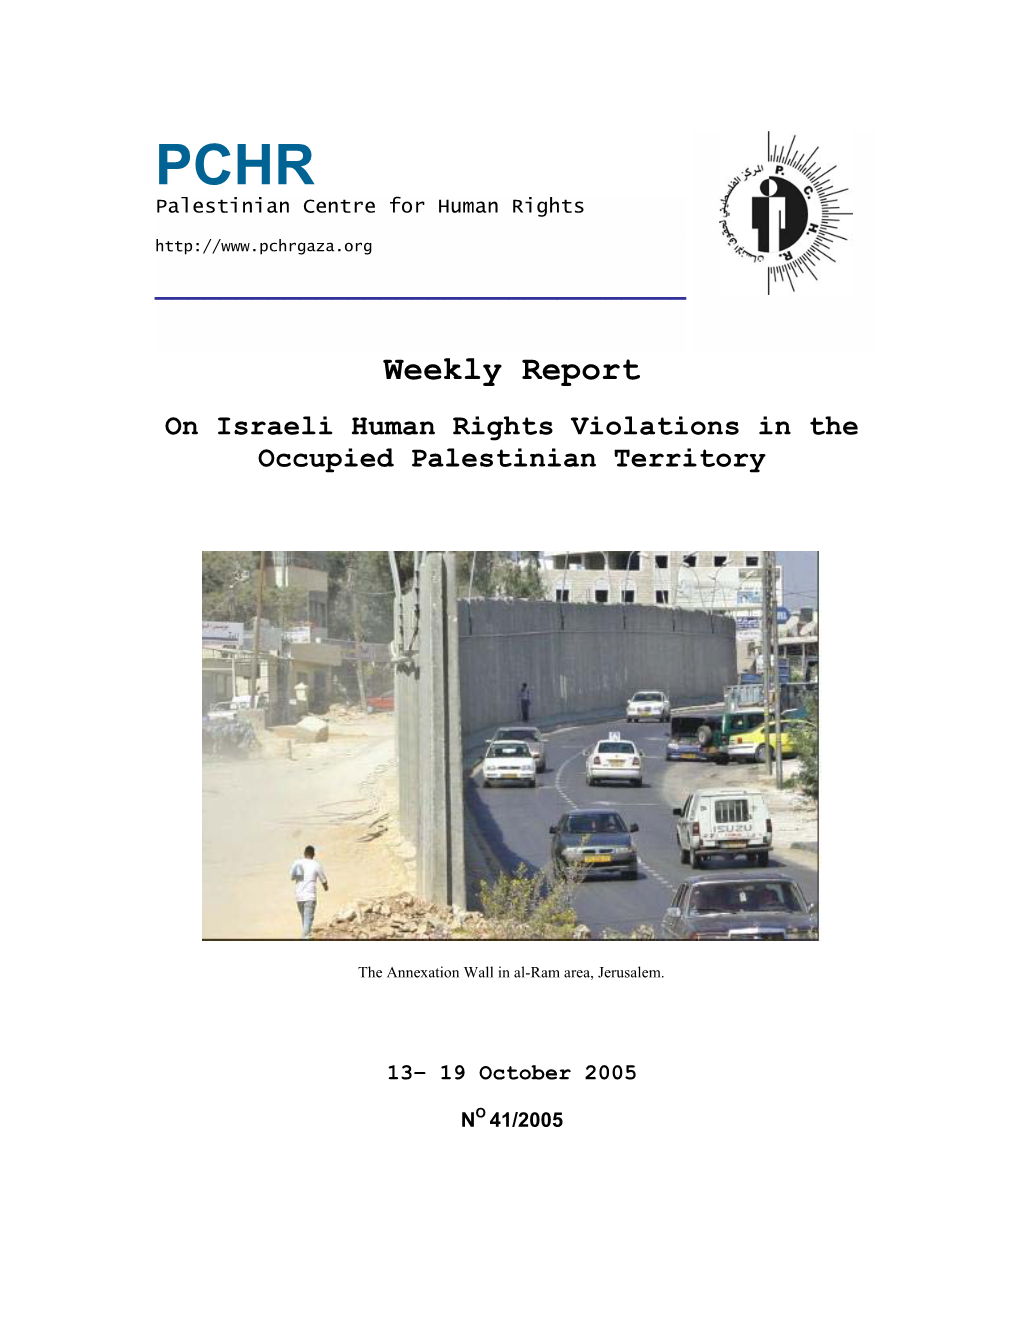 Weekly Report on Israeli Human Rights Violations in the Occupied Palestinian Territory